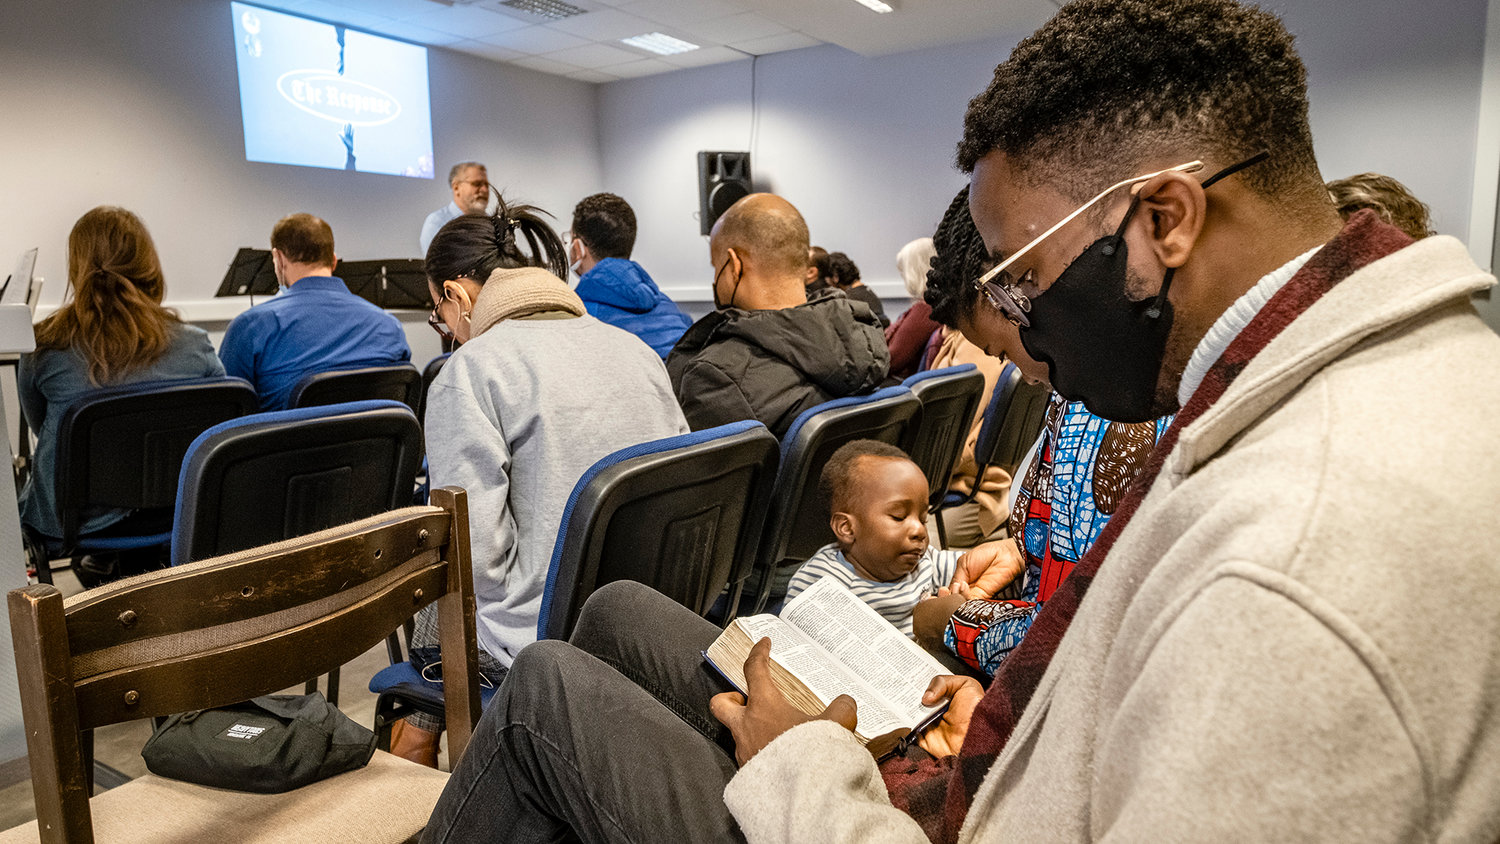 A Kenyan student reads his Bible during a worship service at the International Baptist Church in Debrecen, Hungary. (Photo/International Mission Board)